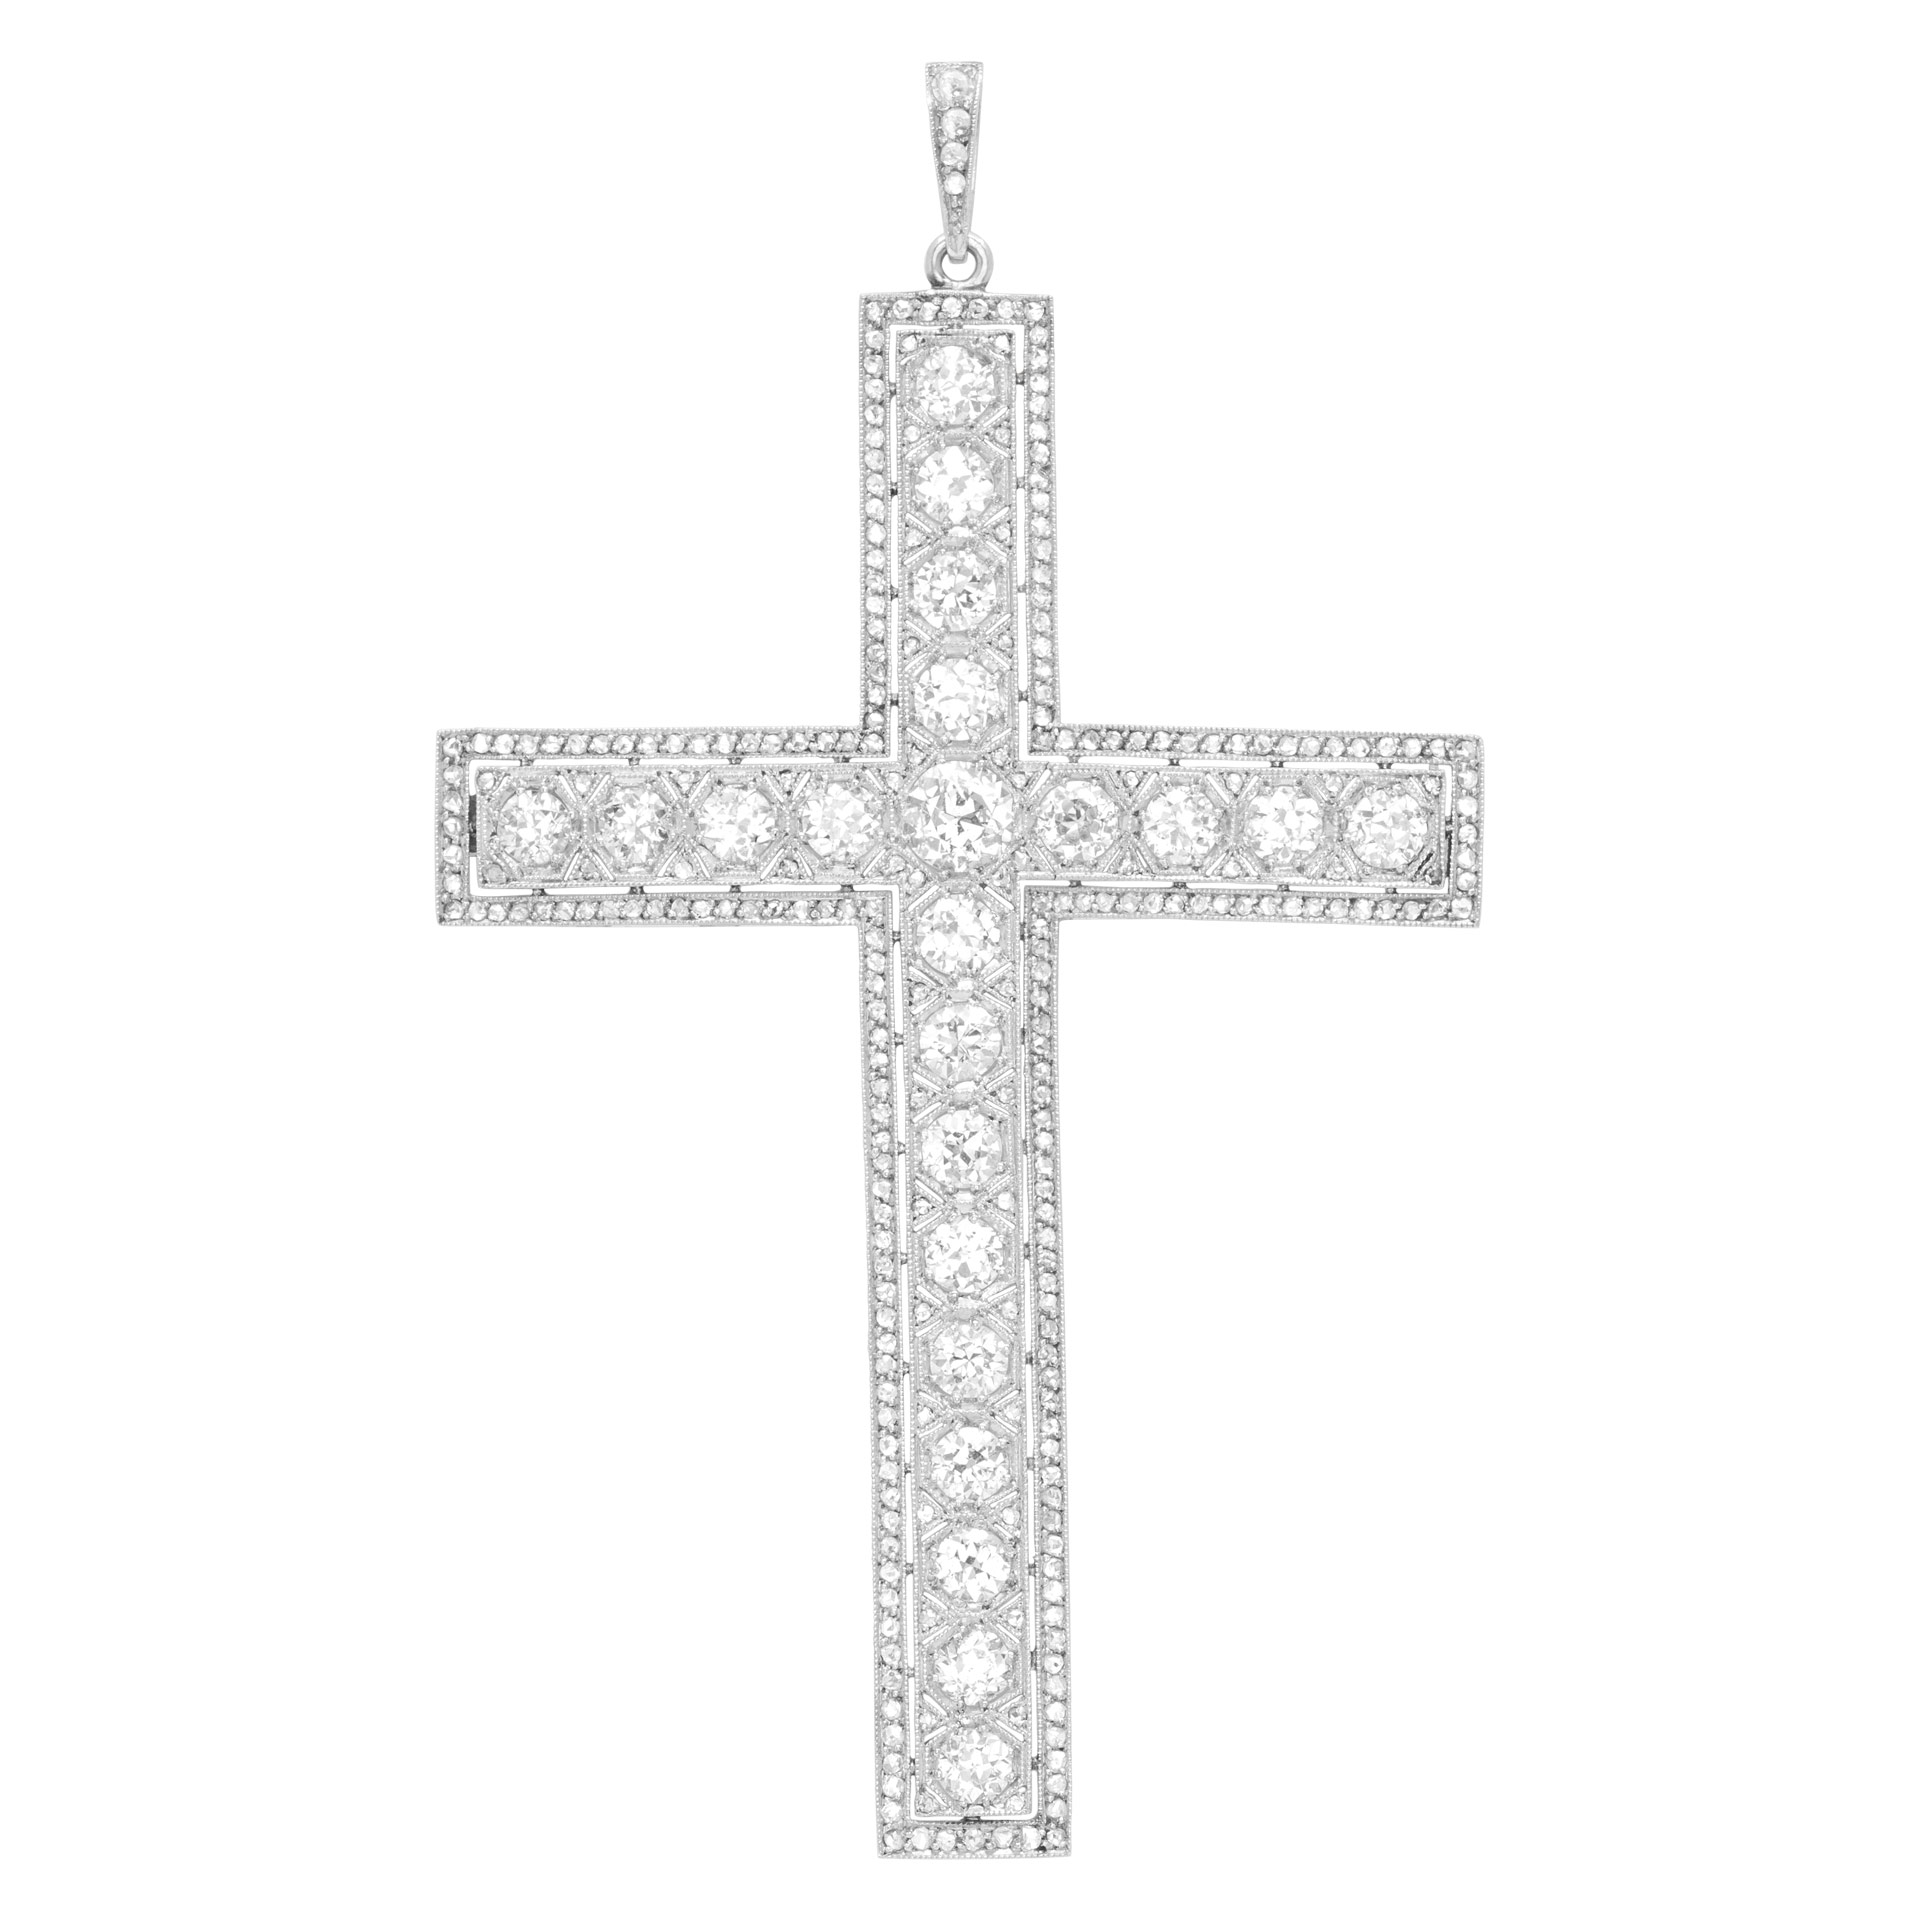 Edwardian (circa 1910) rose cut brilliant diamonds cross pendant in platinum (can also be used as a brooch). Brilliant rose cut diamonds total approx. weight: 6.25 carats